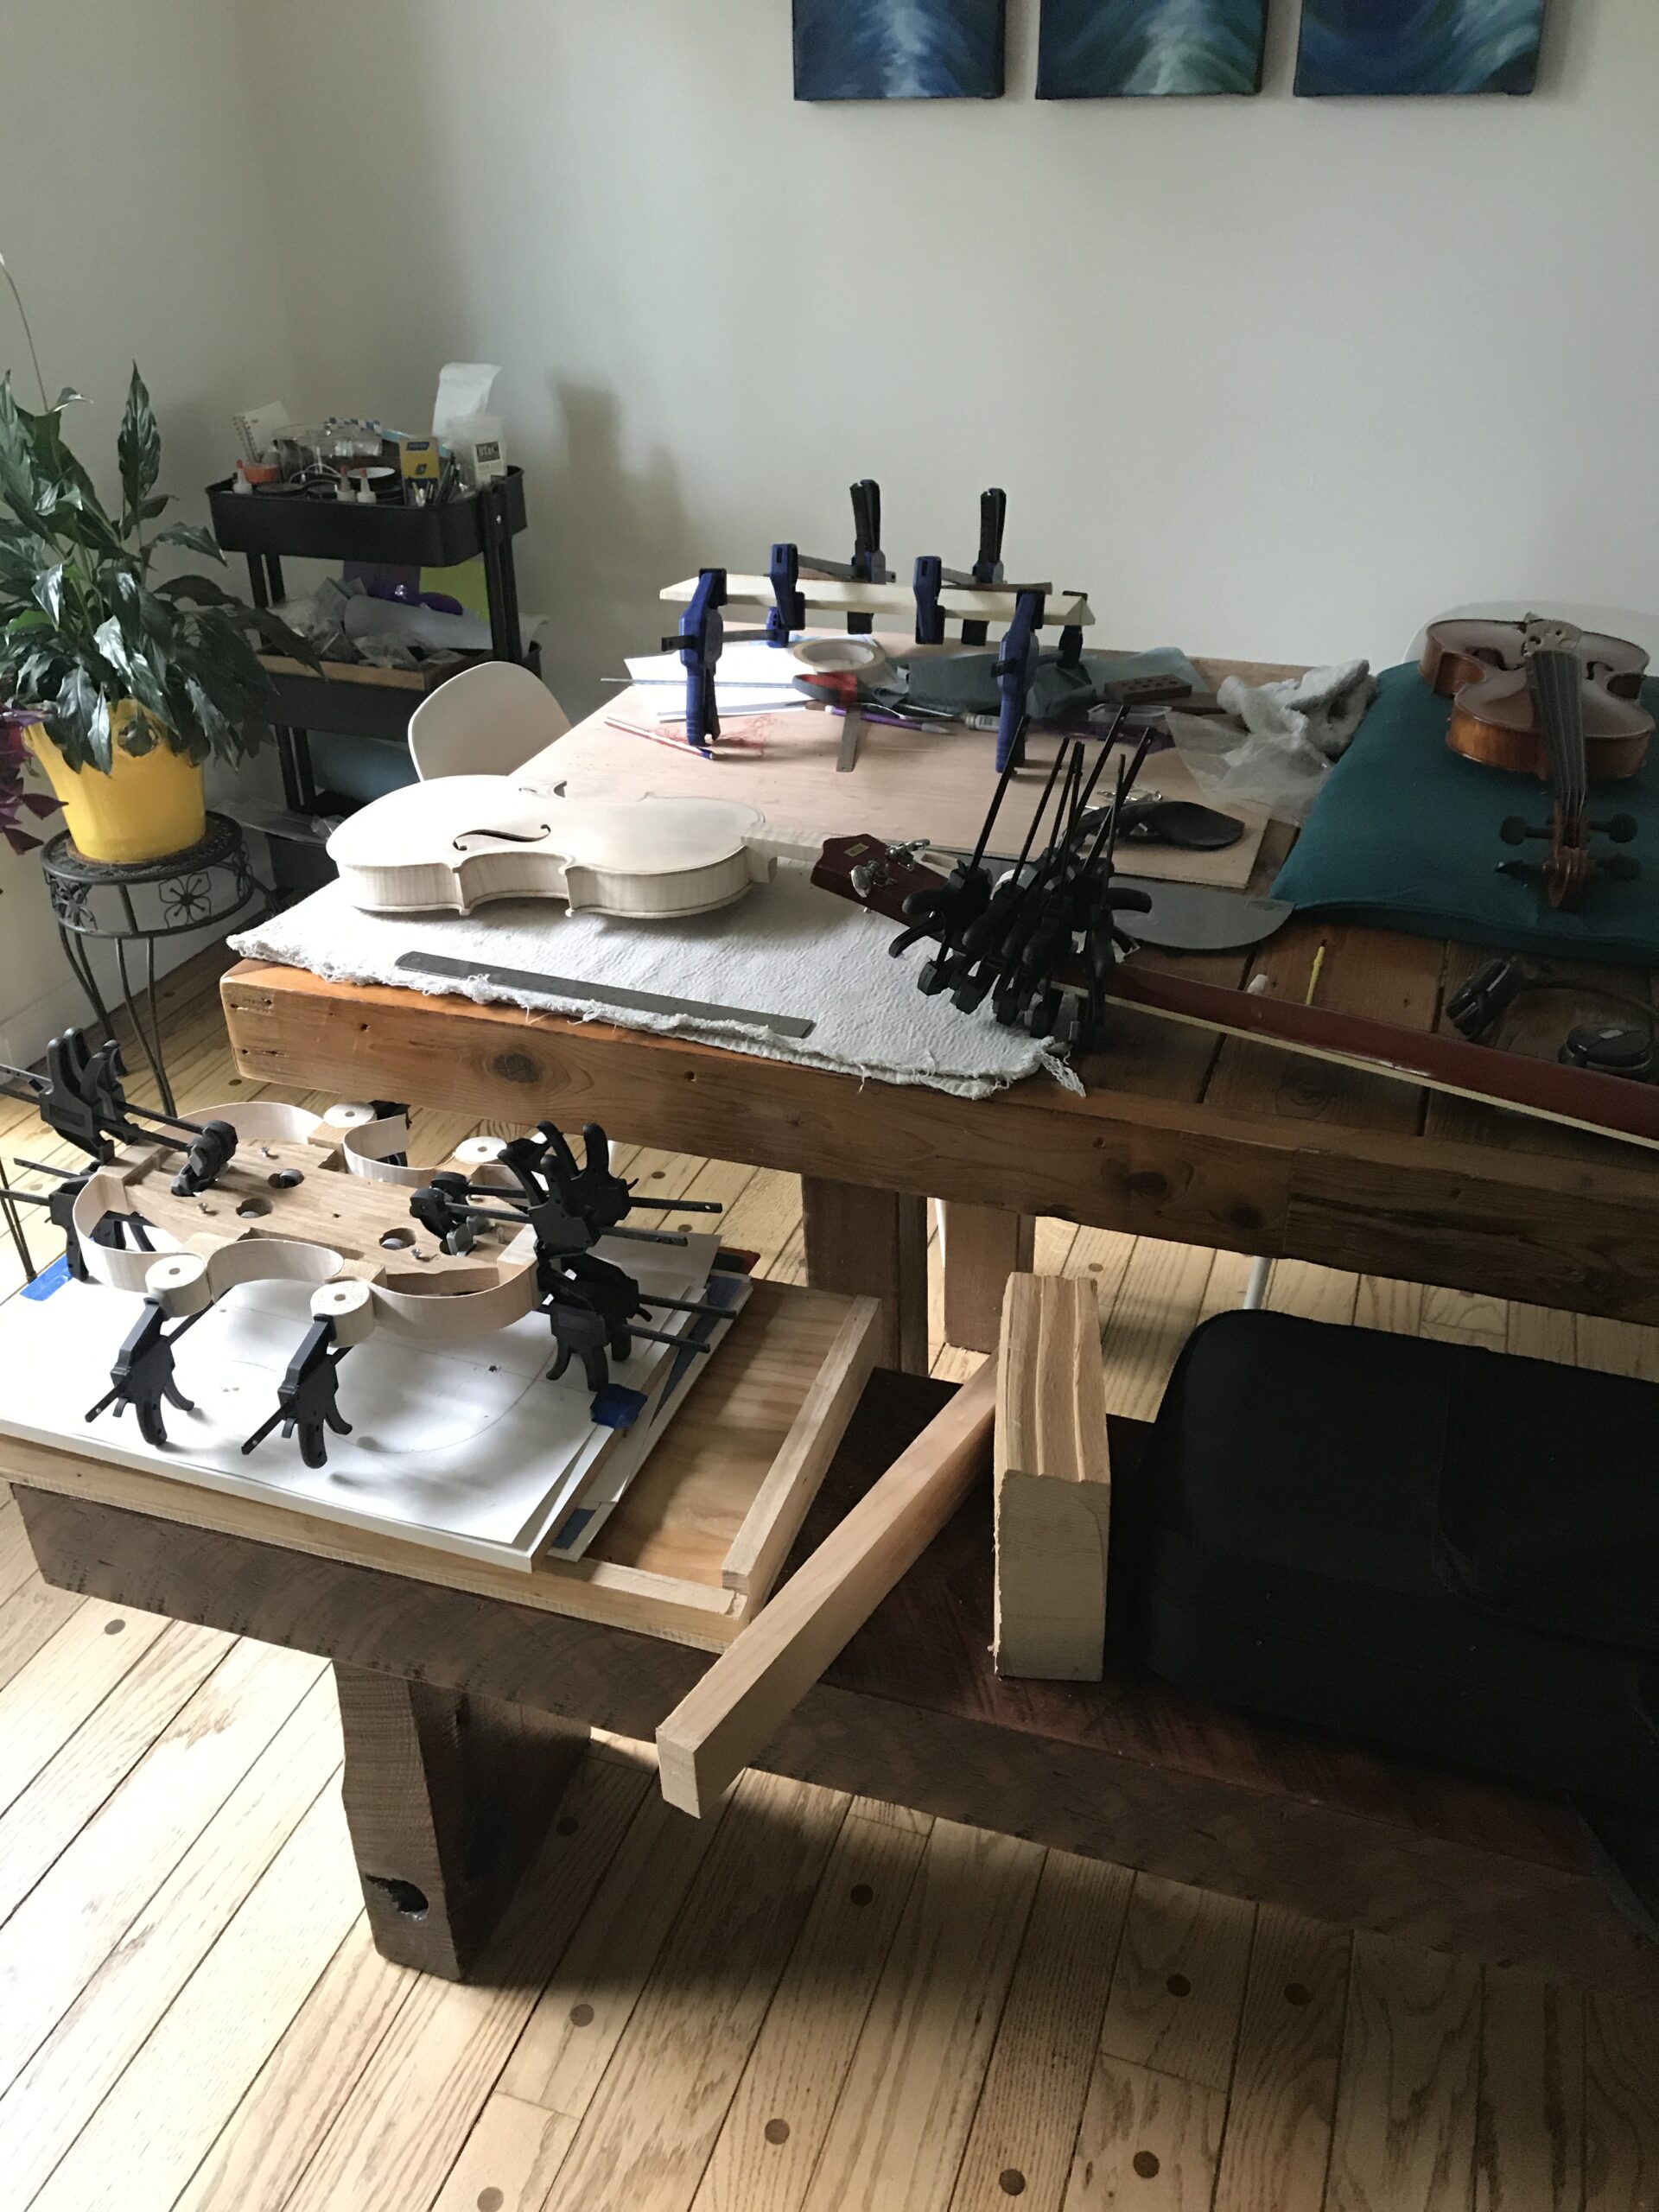 My indoor workbench has four violins in various states of assembly